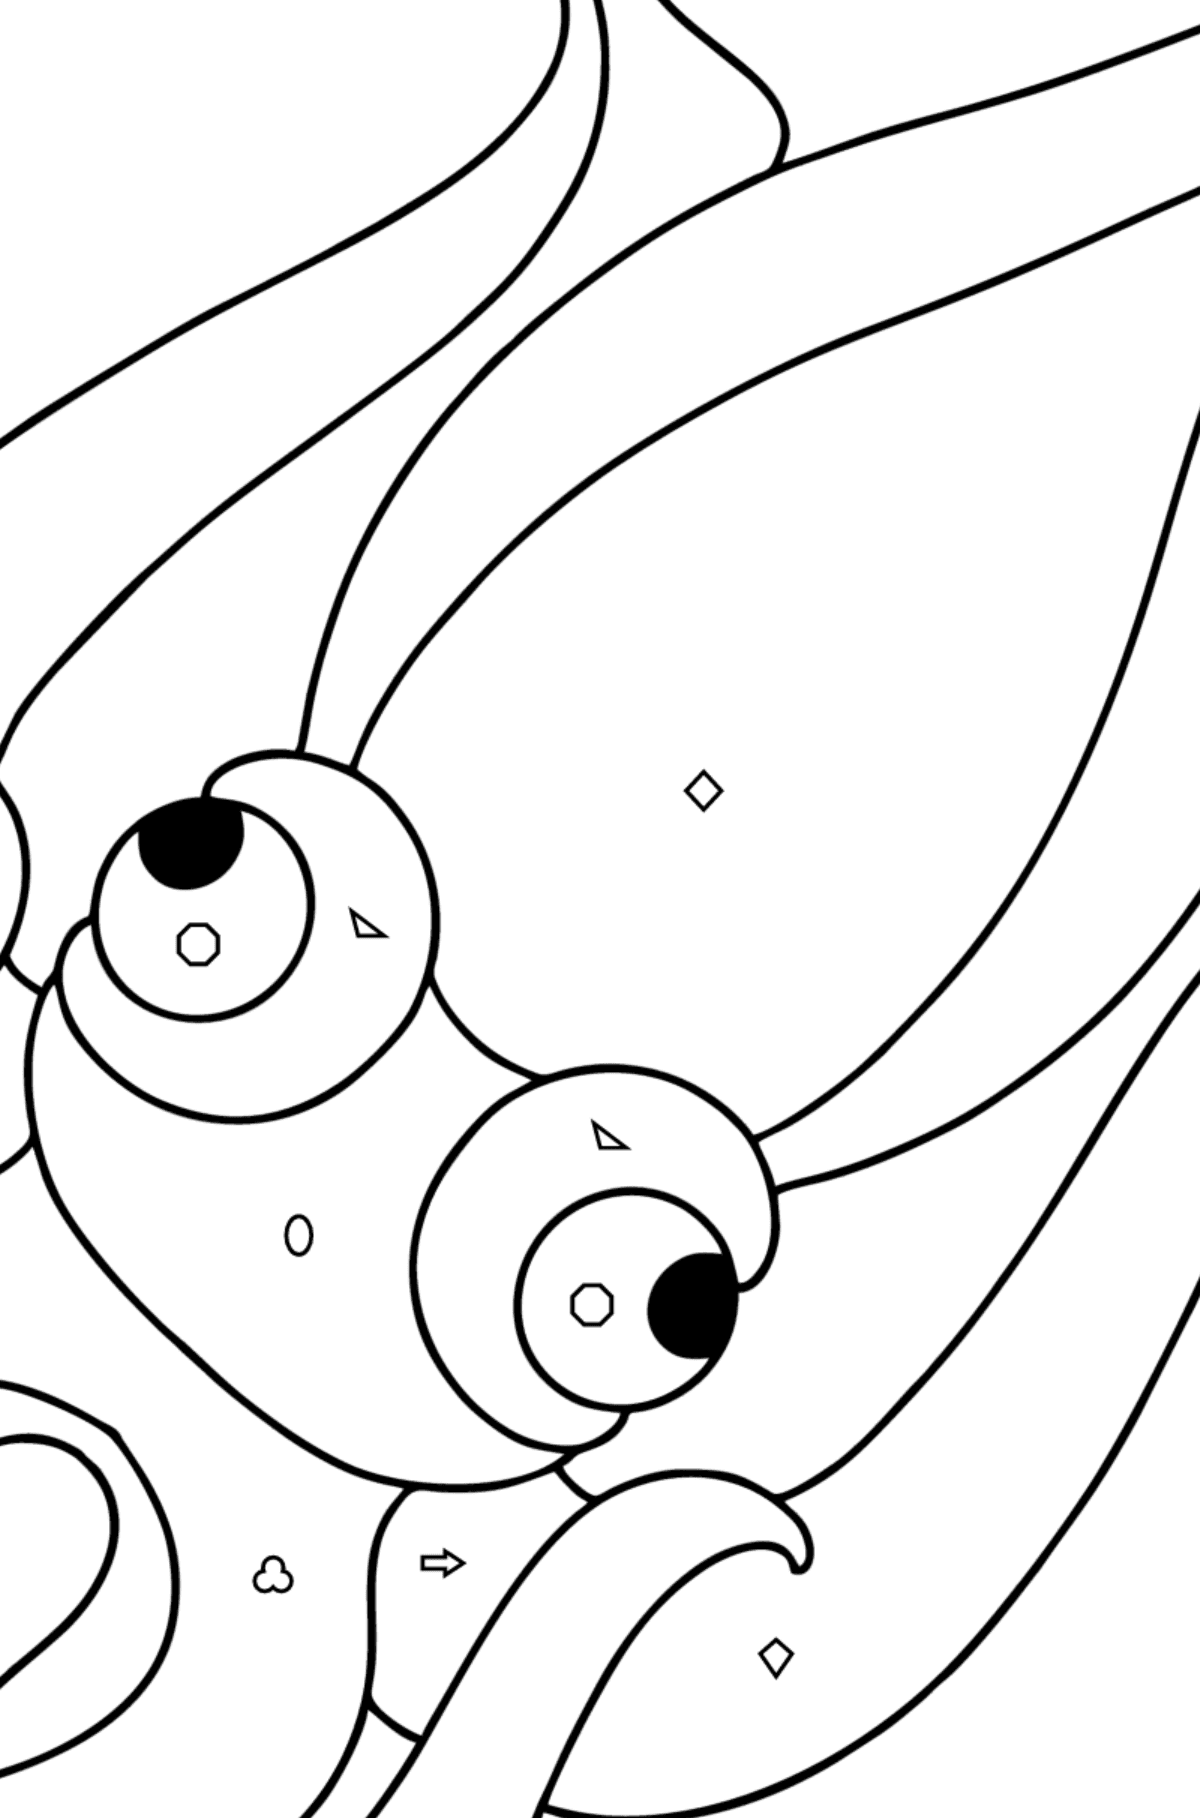 Squid coloring page - Coloring by Geometric Shapes for Kids